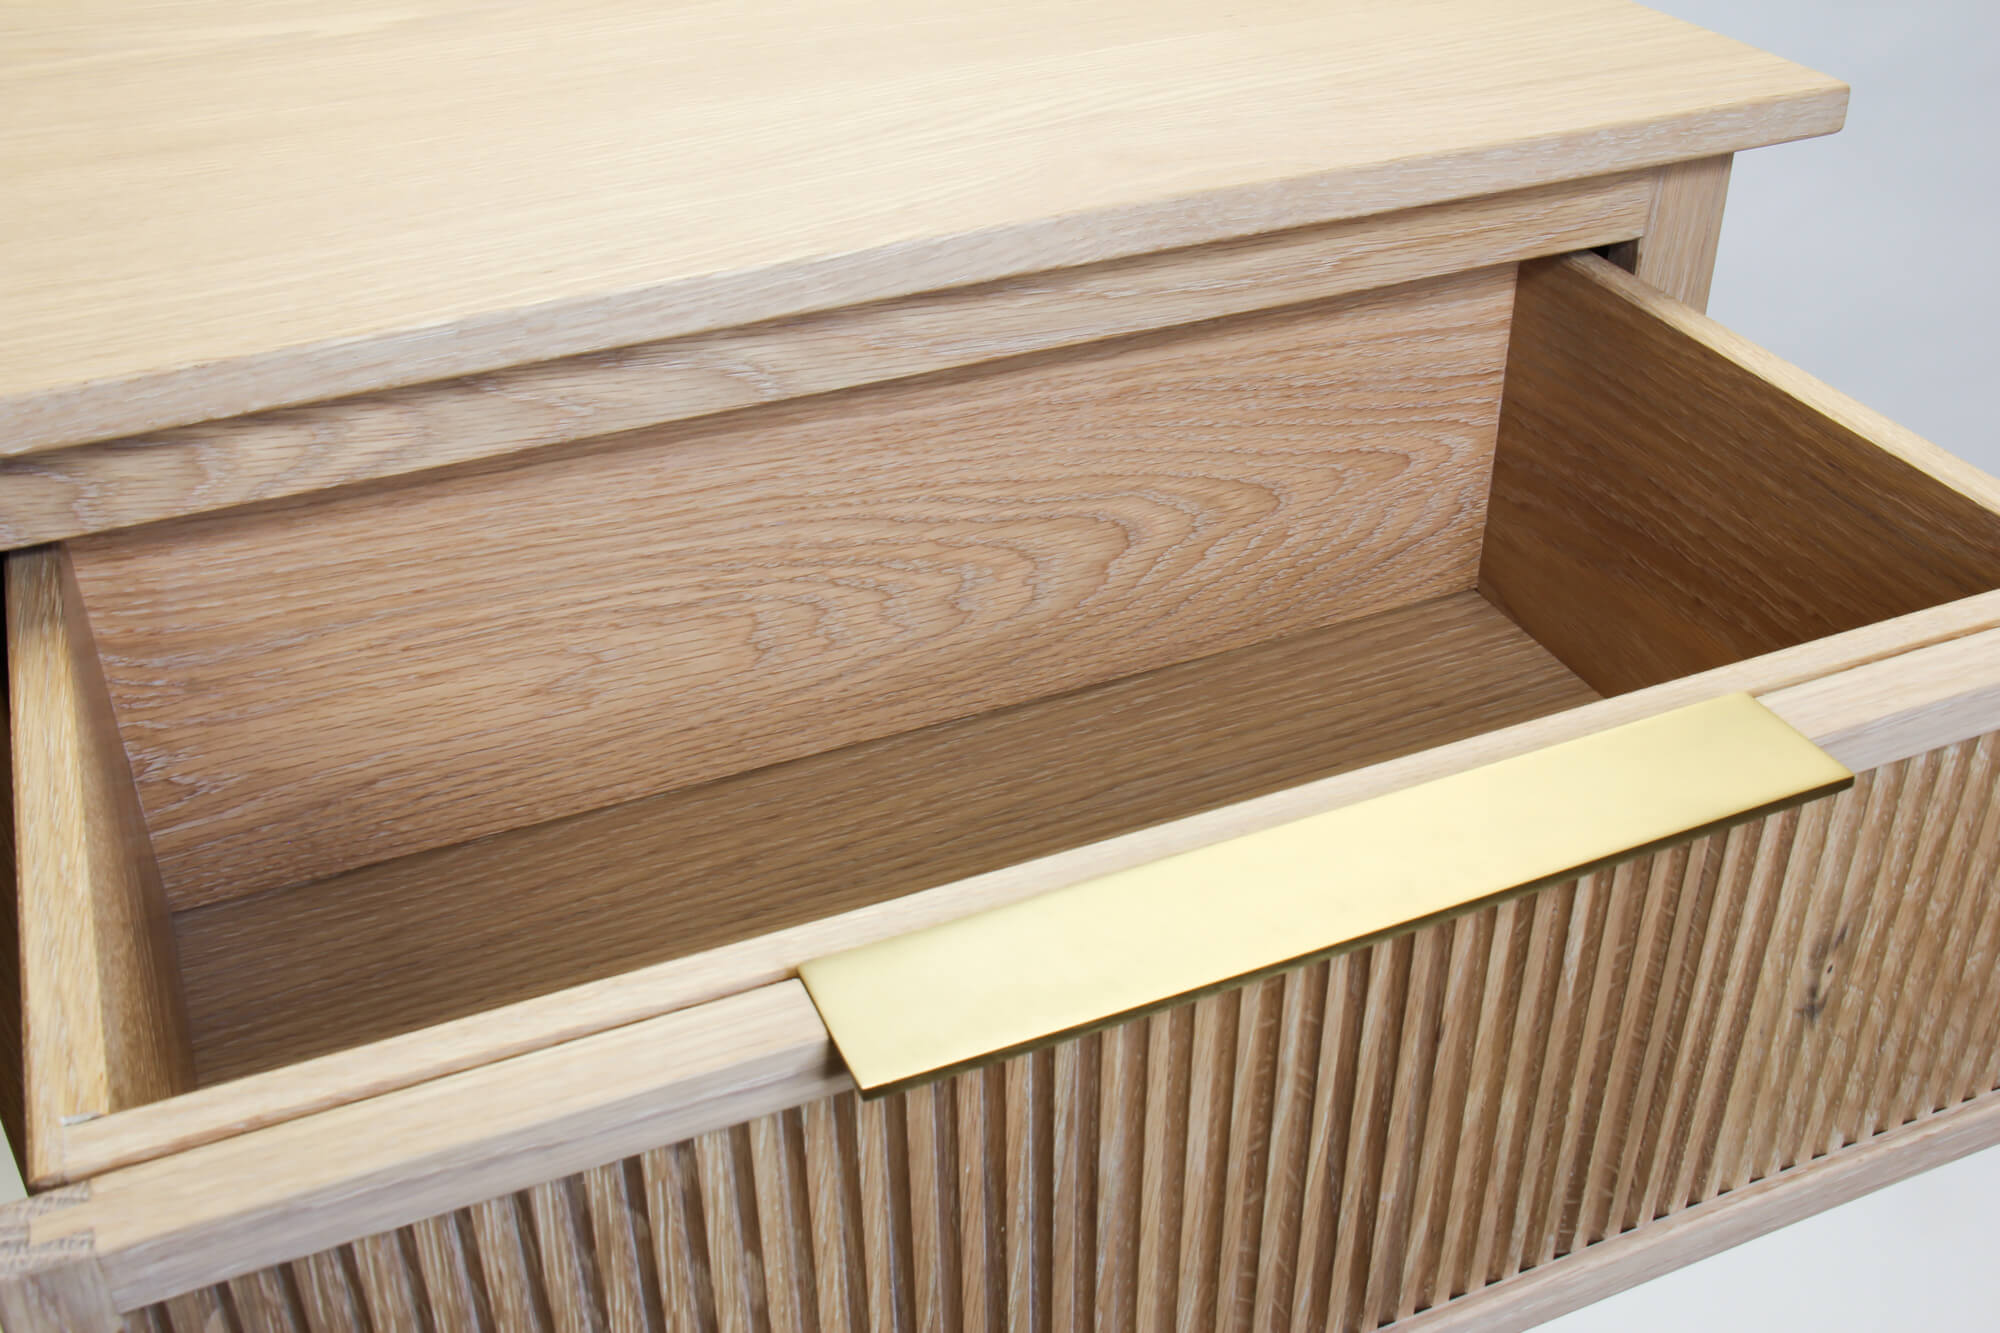 An open dresser drawer with a reeded drawer front and brass pull is pictured. It is finished with Rubio Monocoat hardwaxoil.